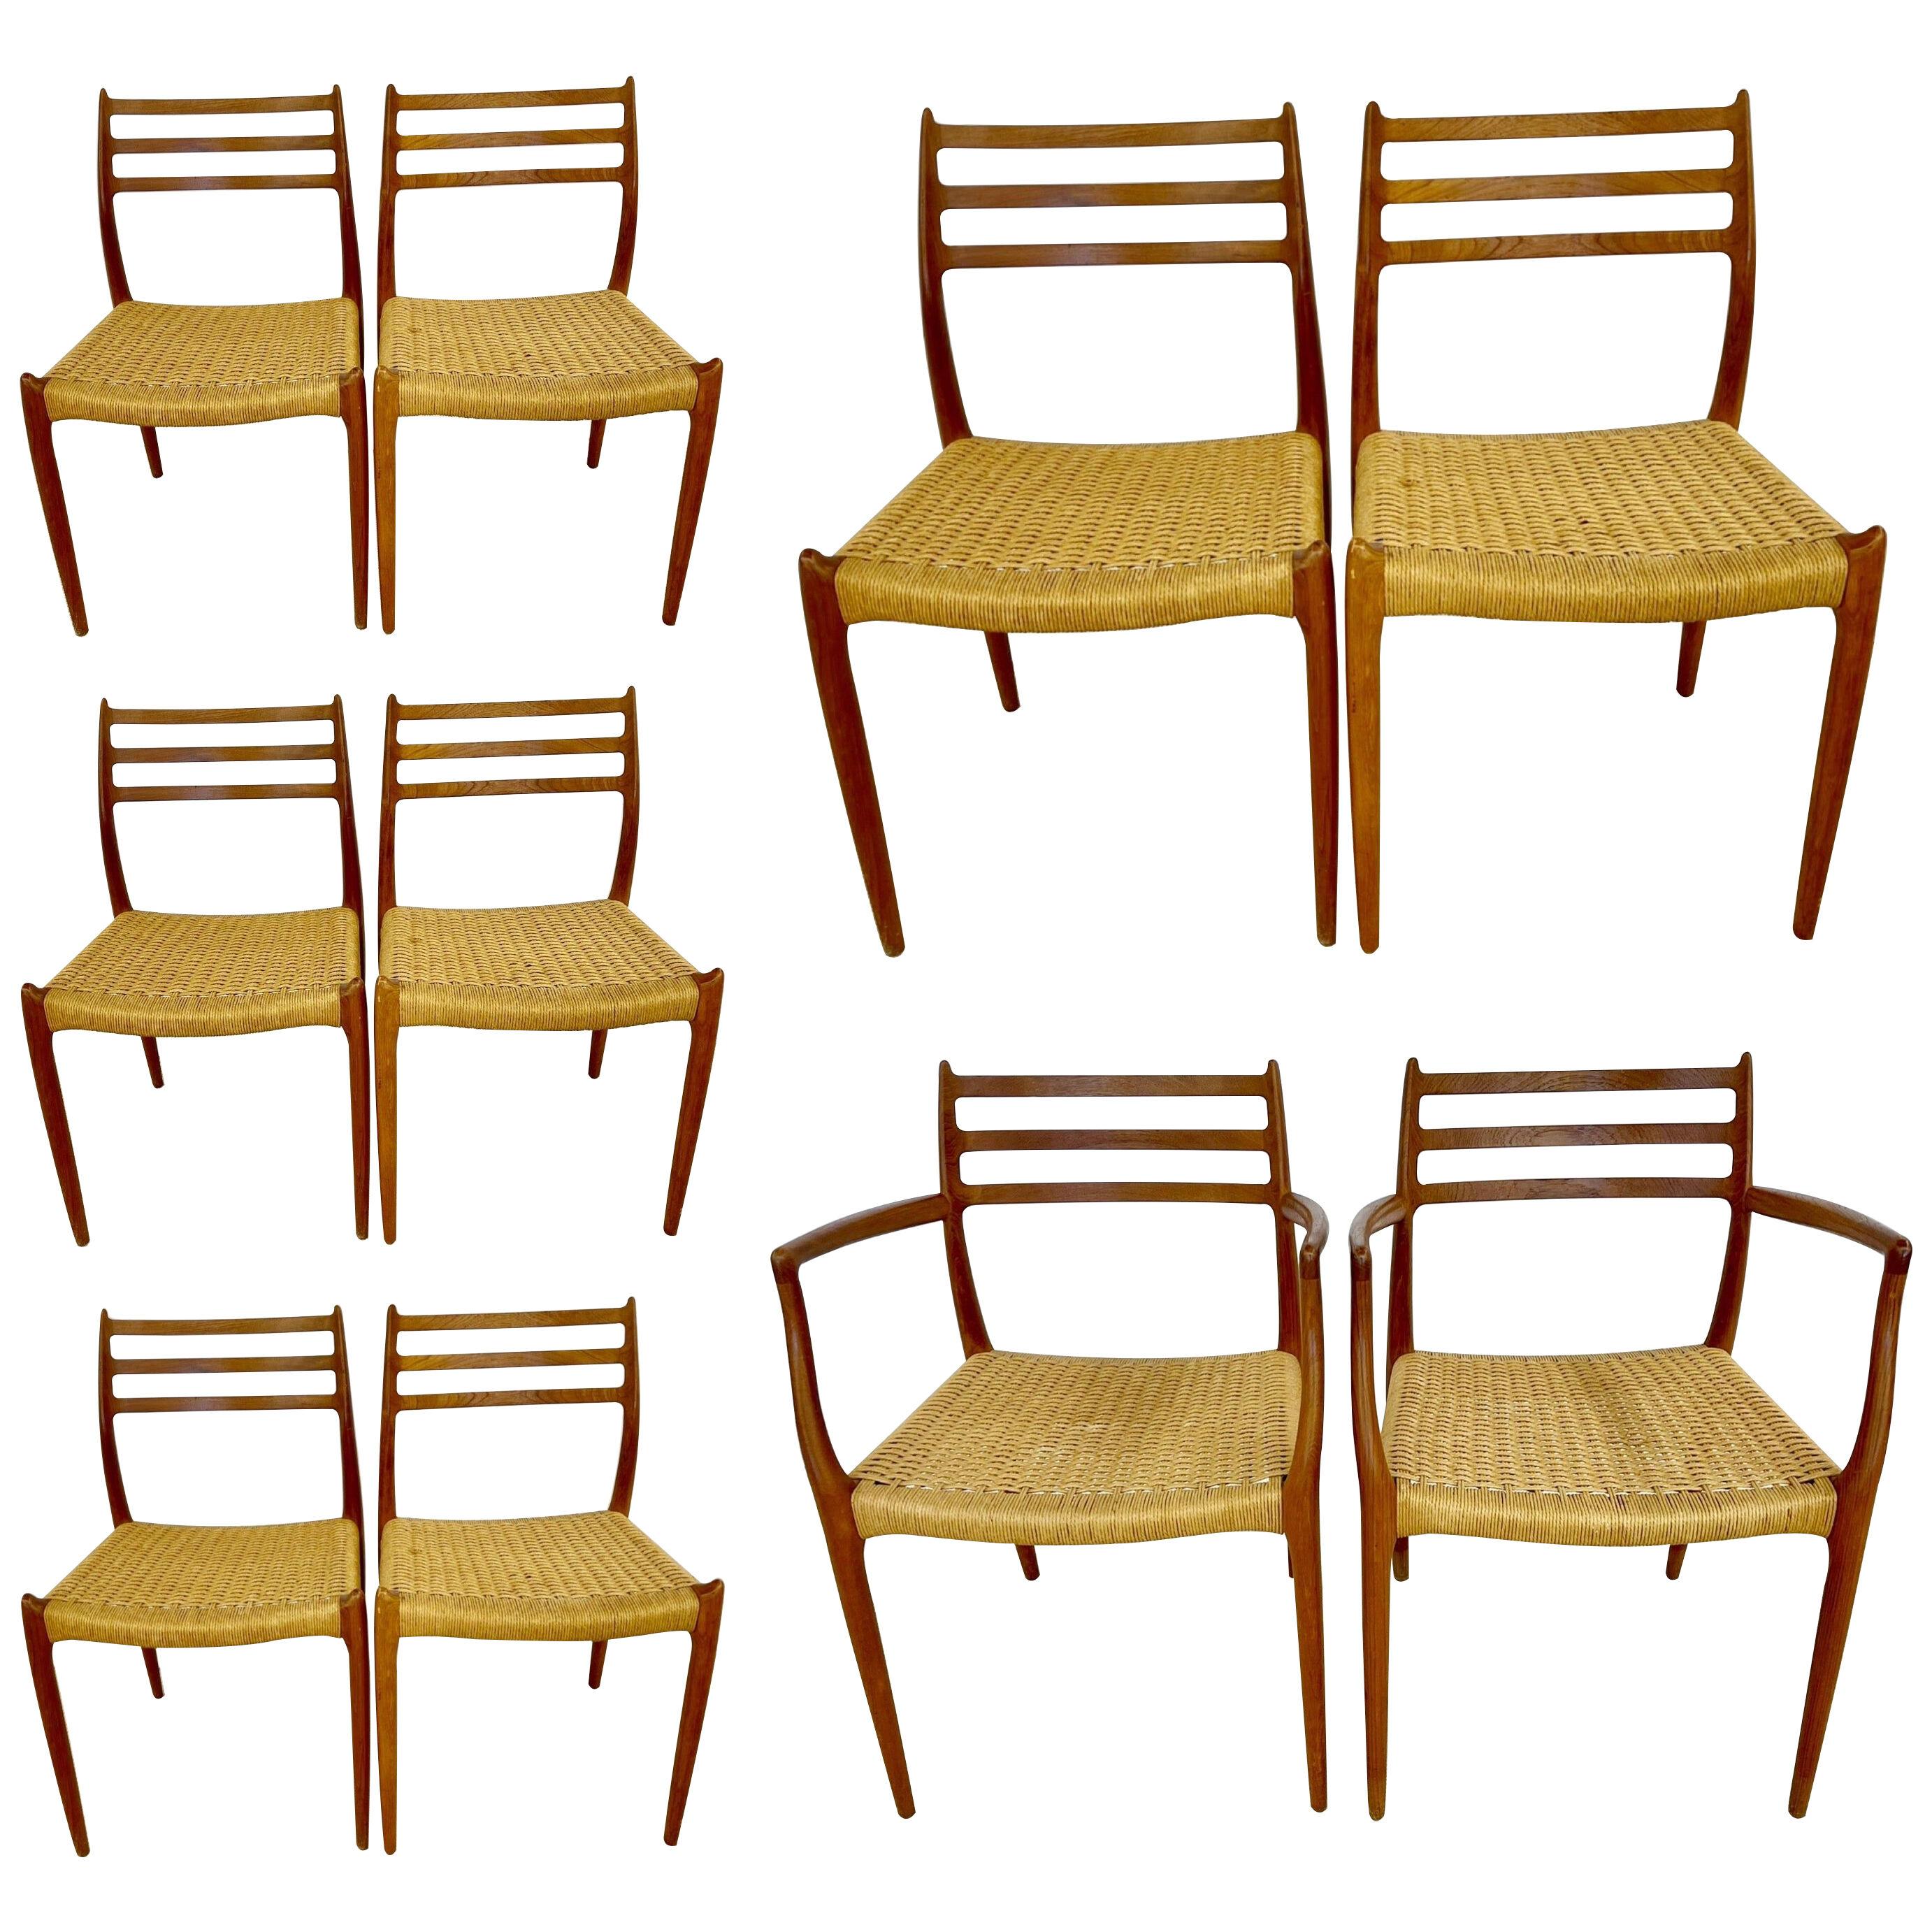 Set of 10 Mid-Century Modern Dining Chairs, Danish, Niels Moller, 1950s